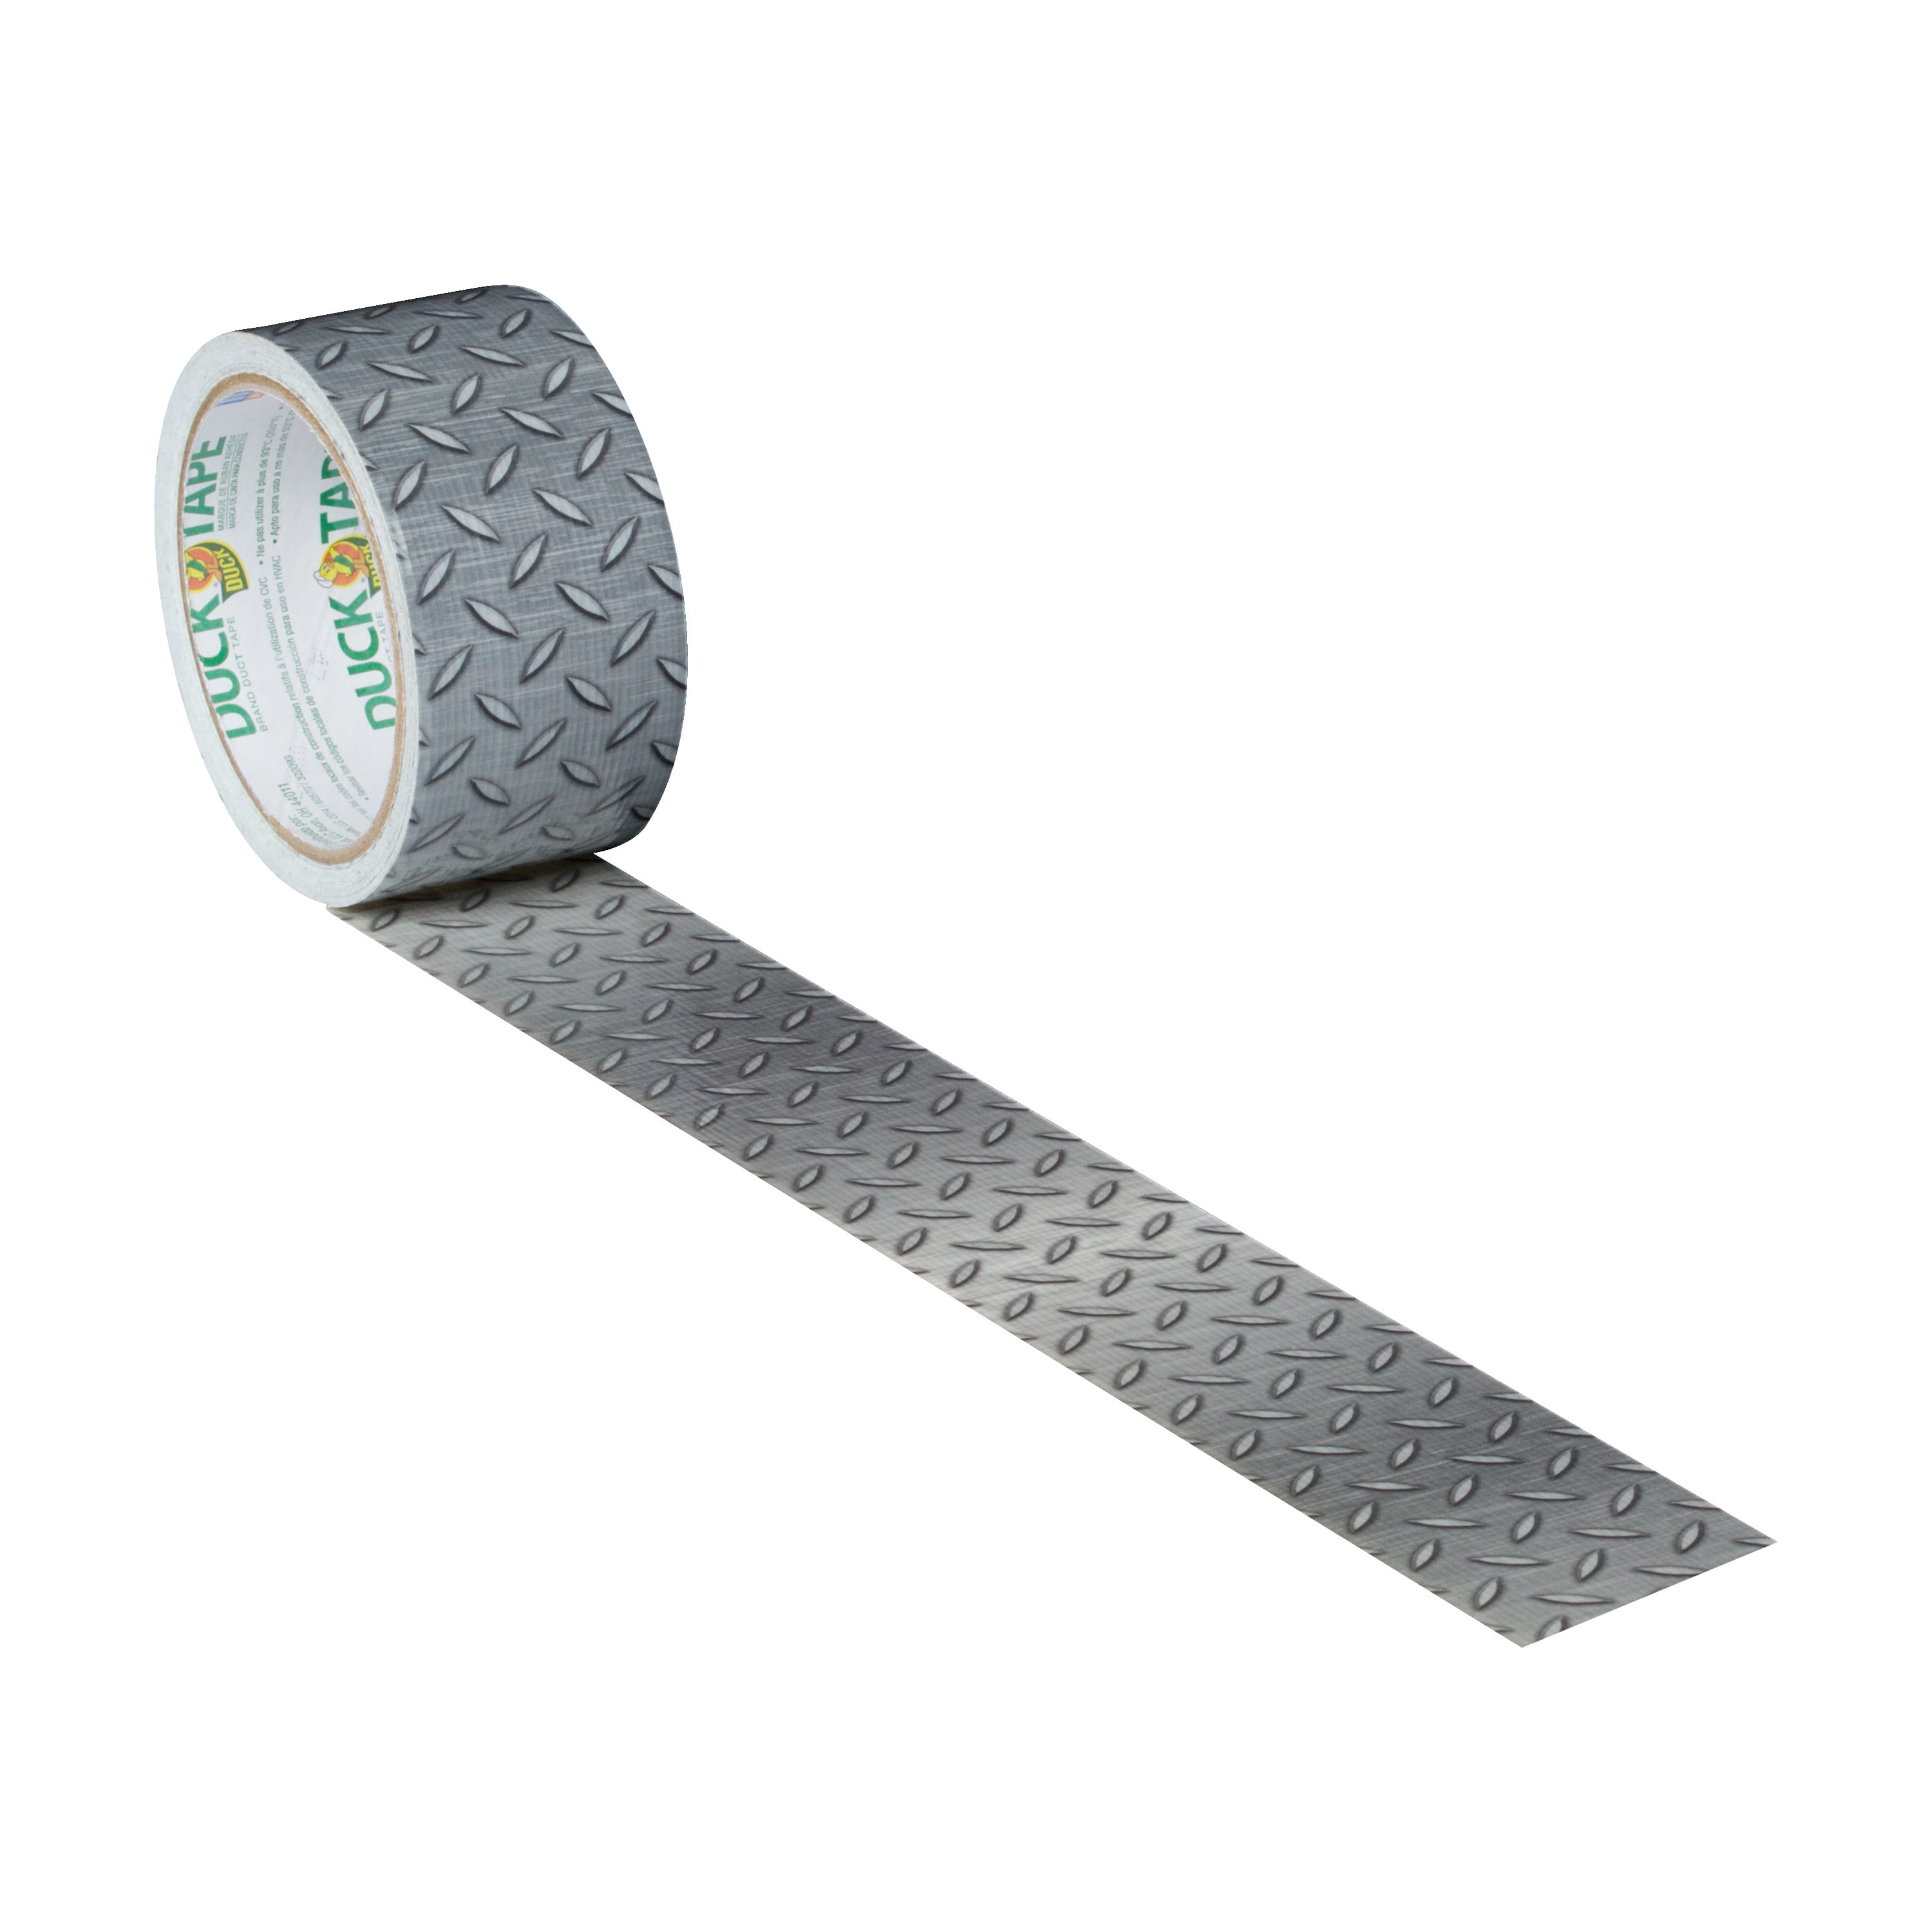 Duct Tape Suppliers, Manufacturers, Factory - Customized Duct Tape